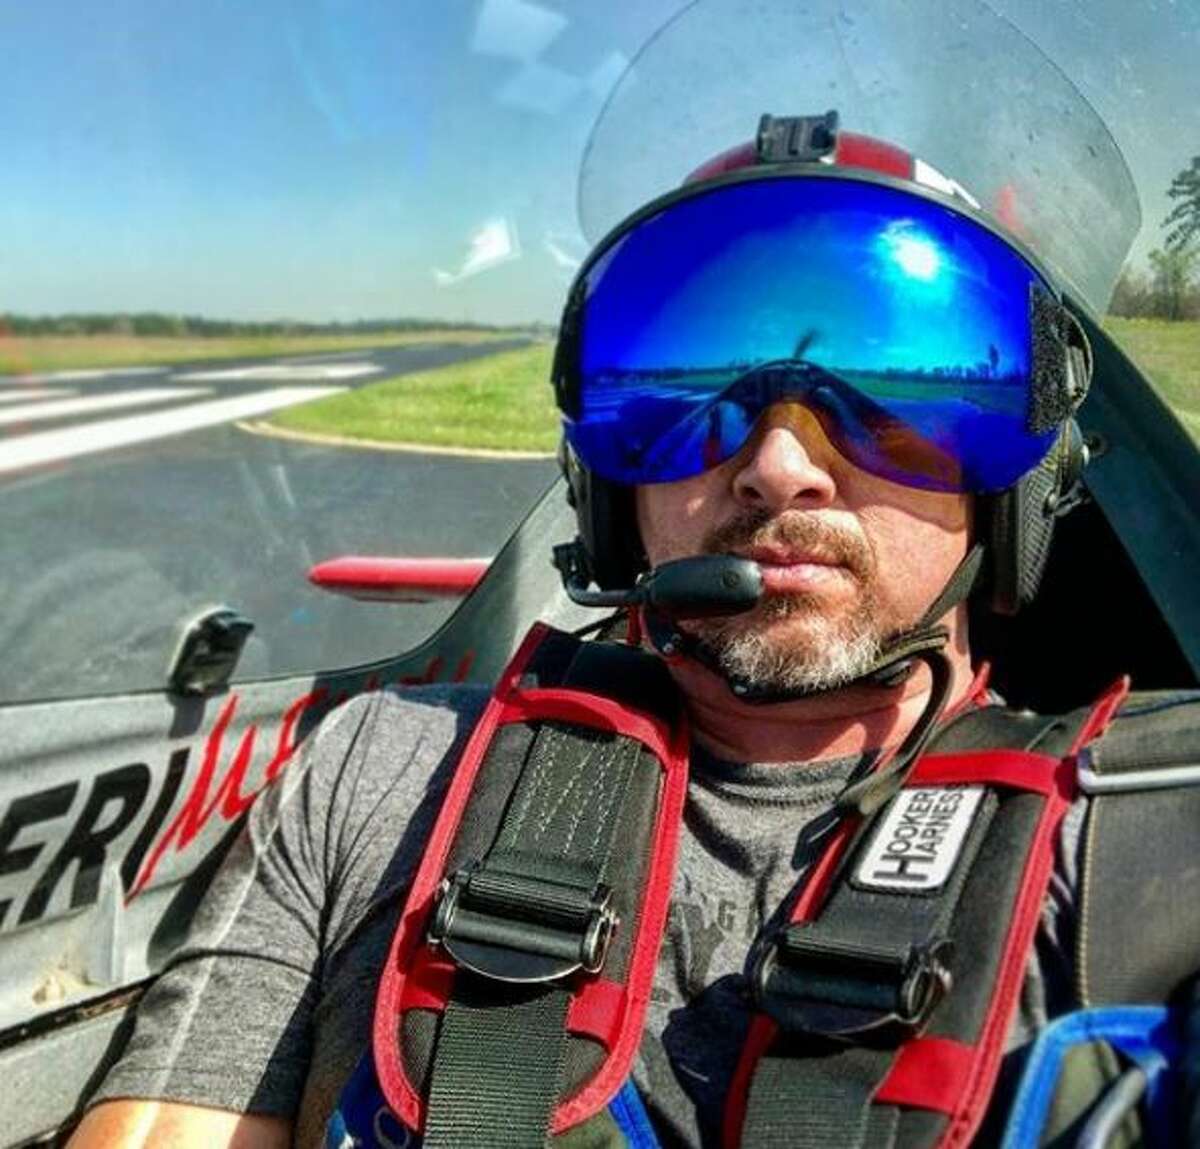 Rob Holland safely landed after his engine failed while he was more than 11,000 feet in the air.